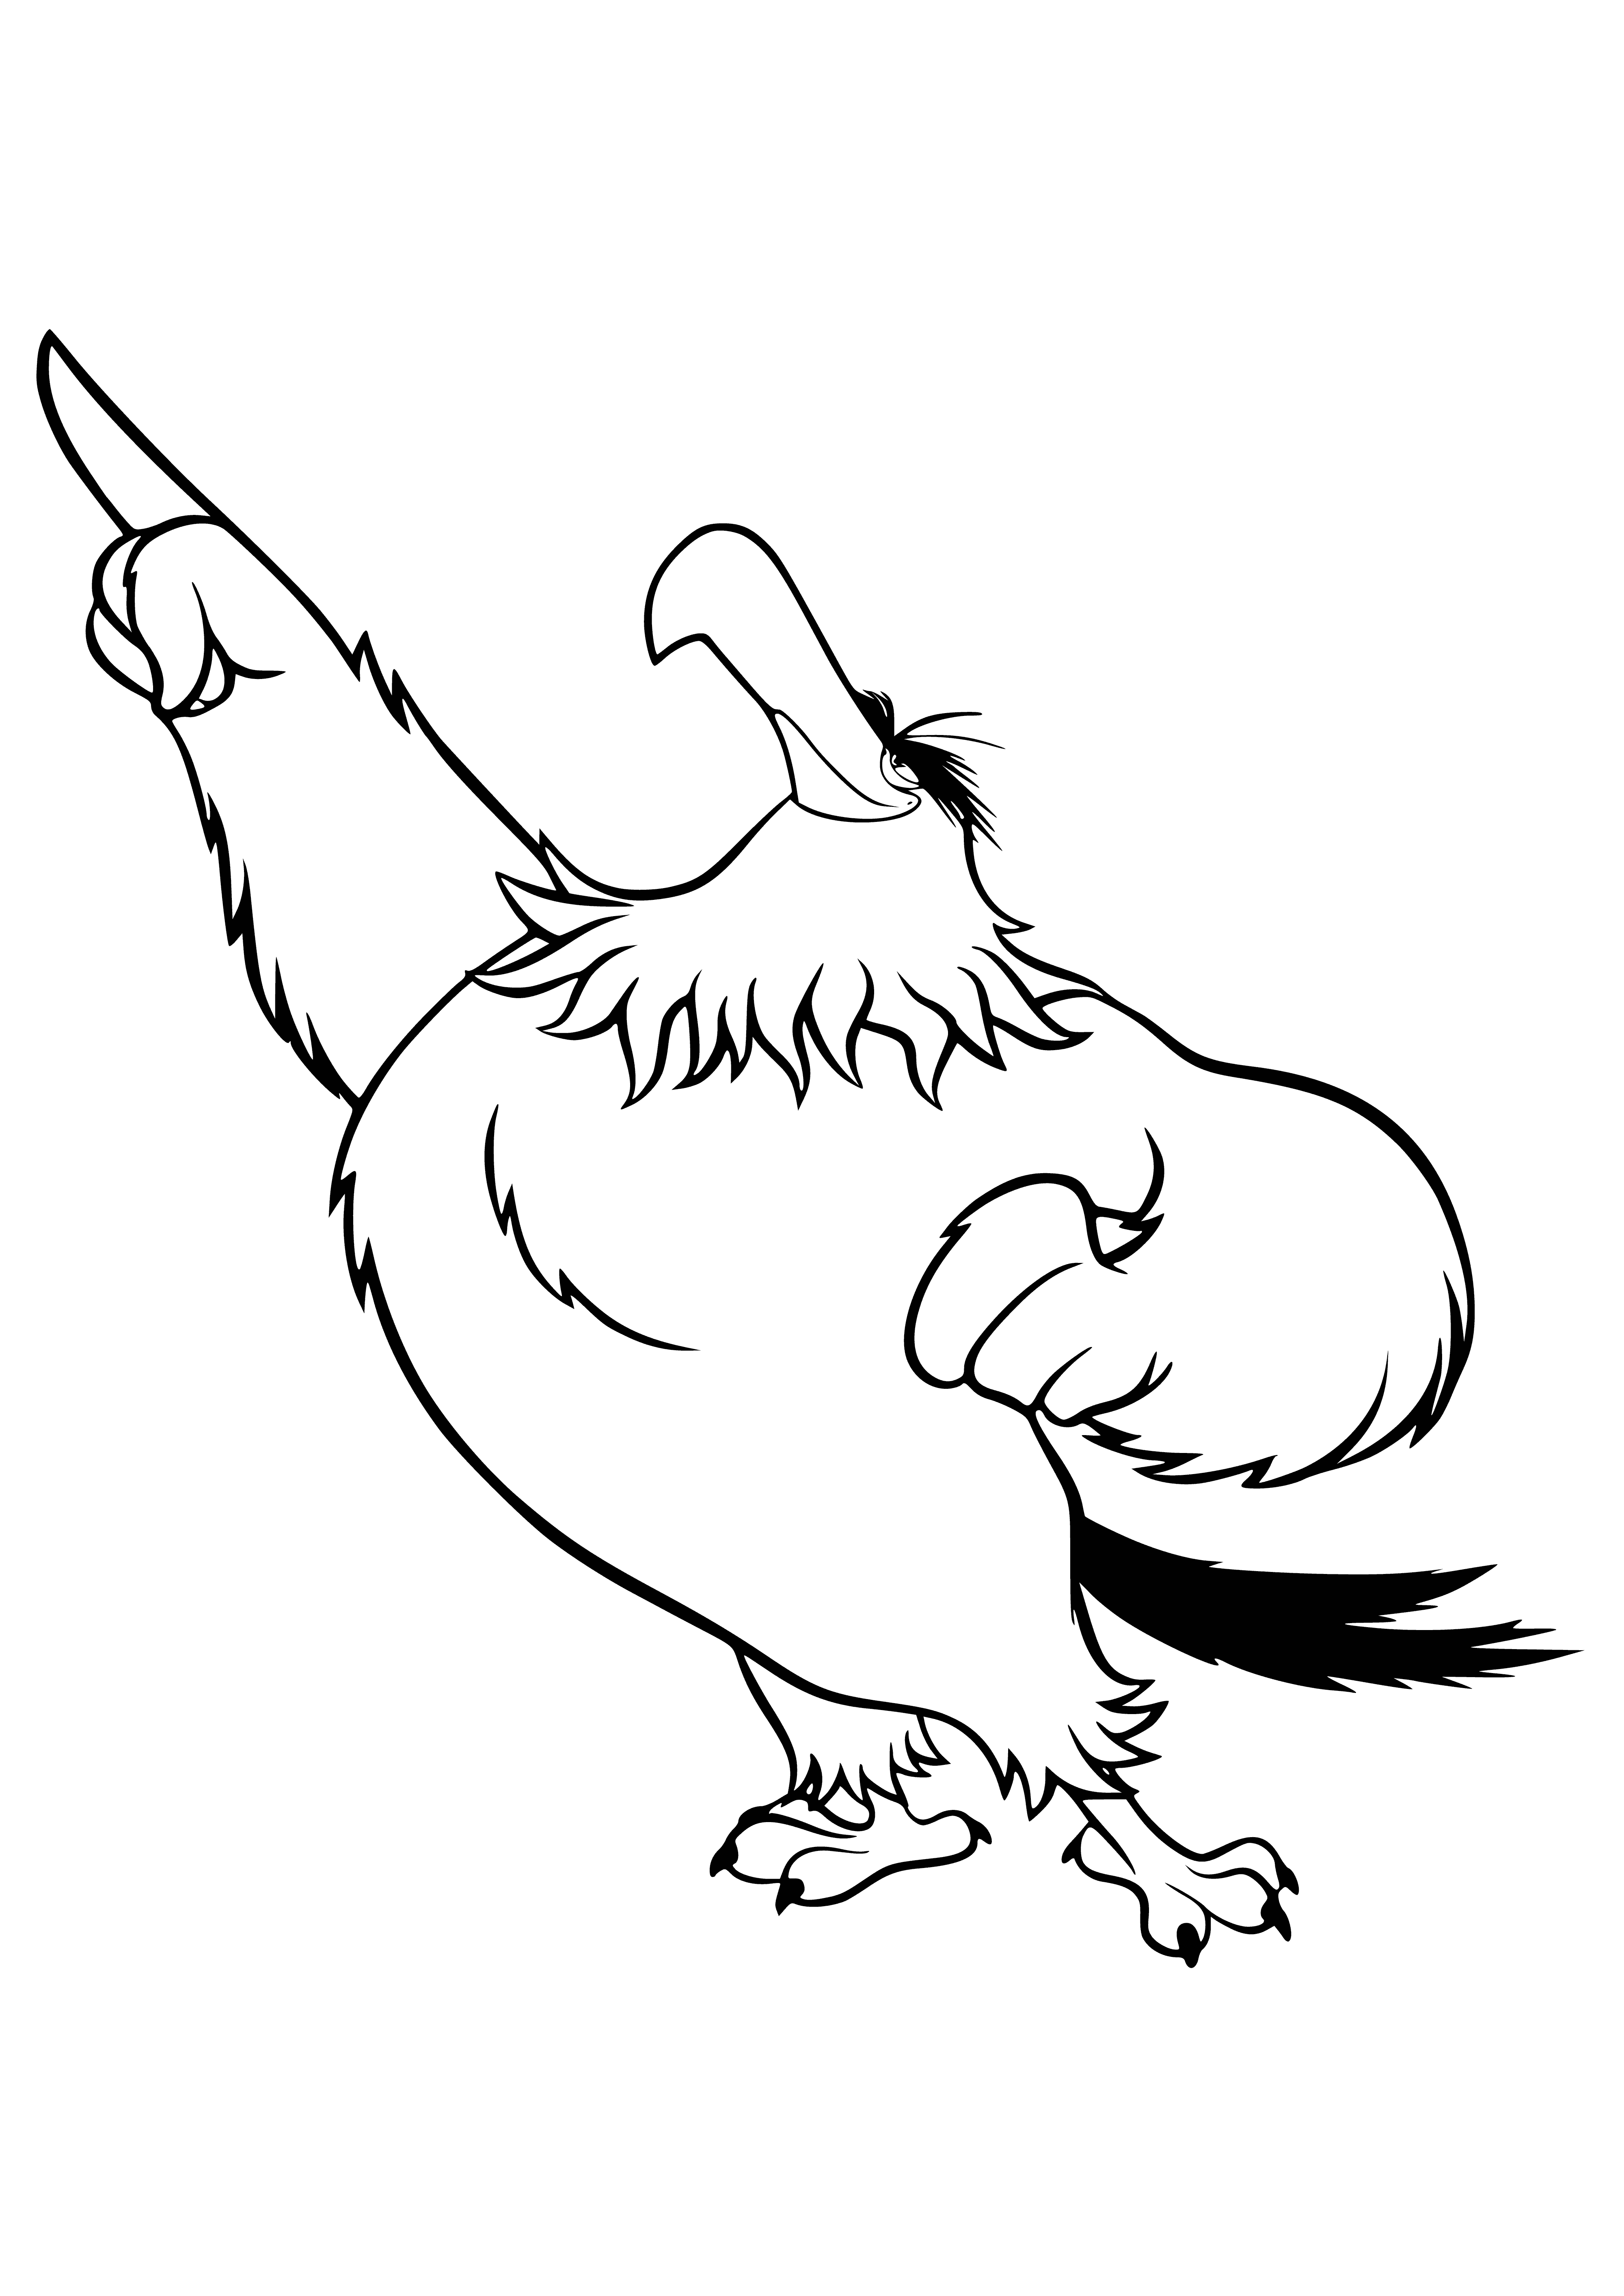 Mighty eagle coloring page